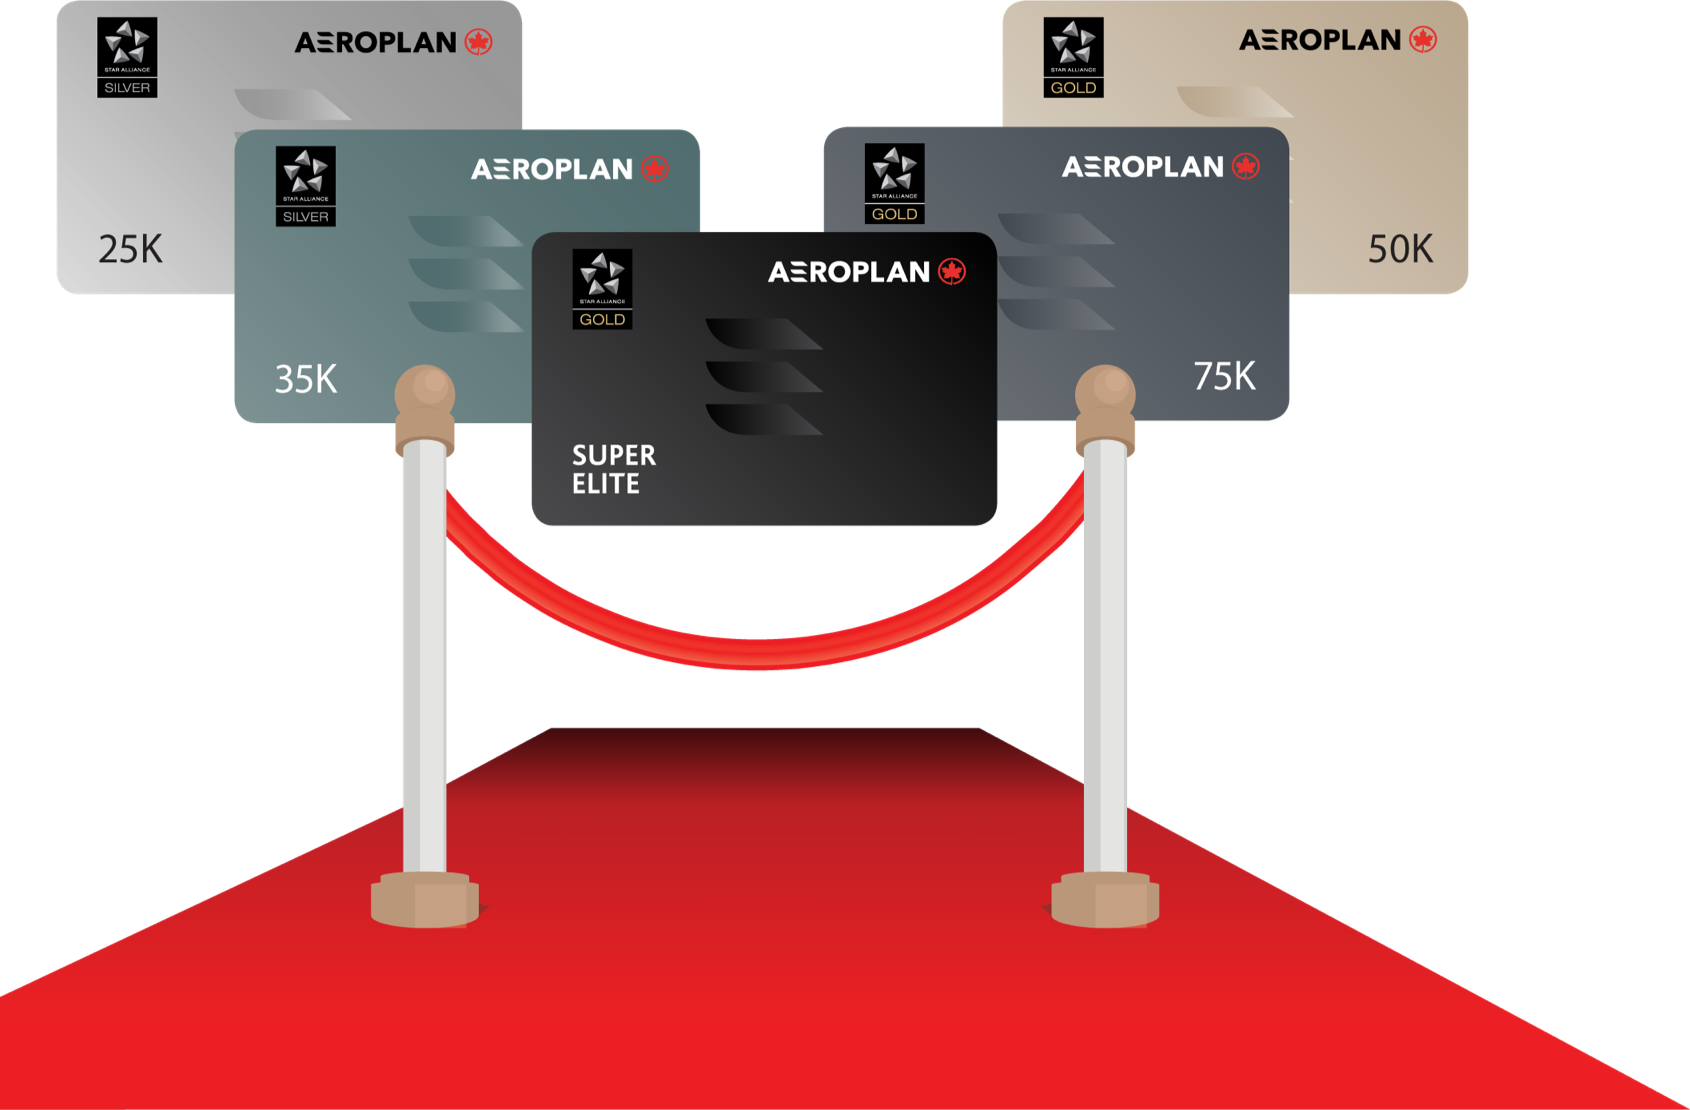 card on red carpet image